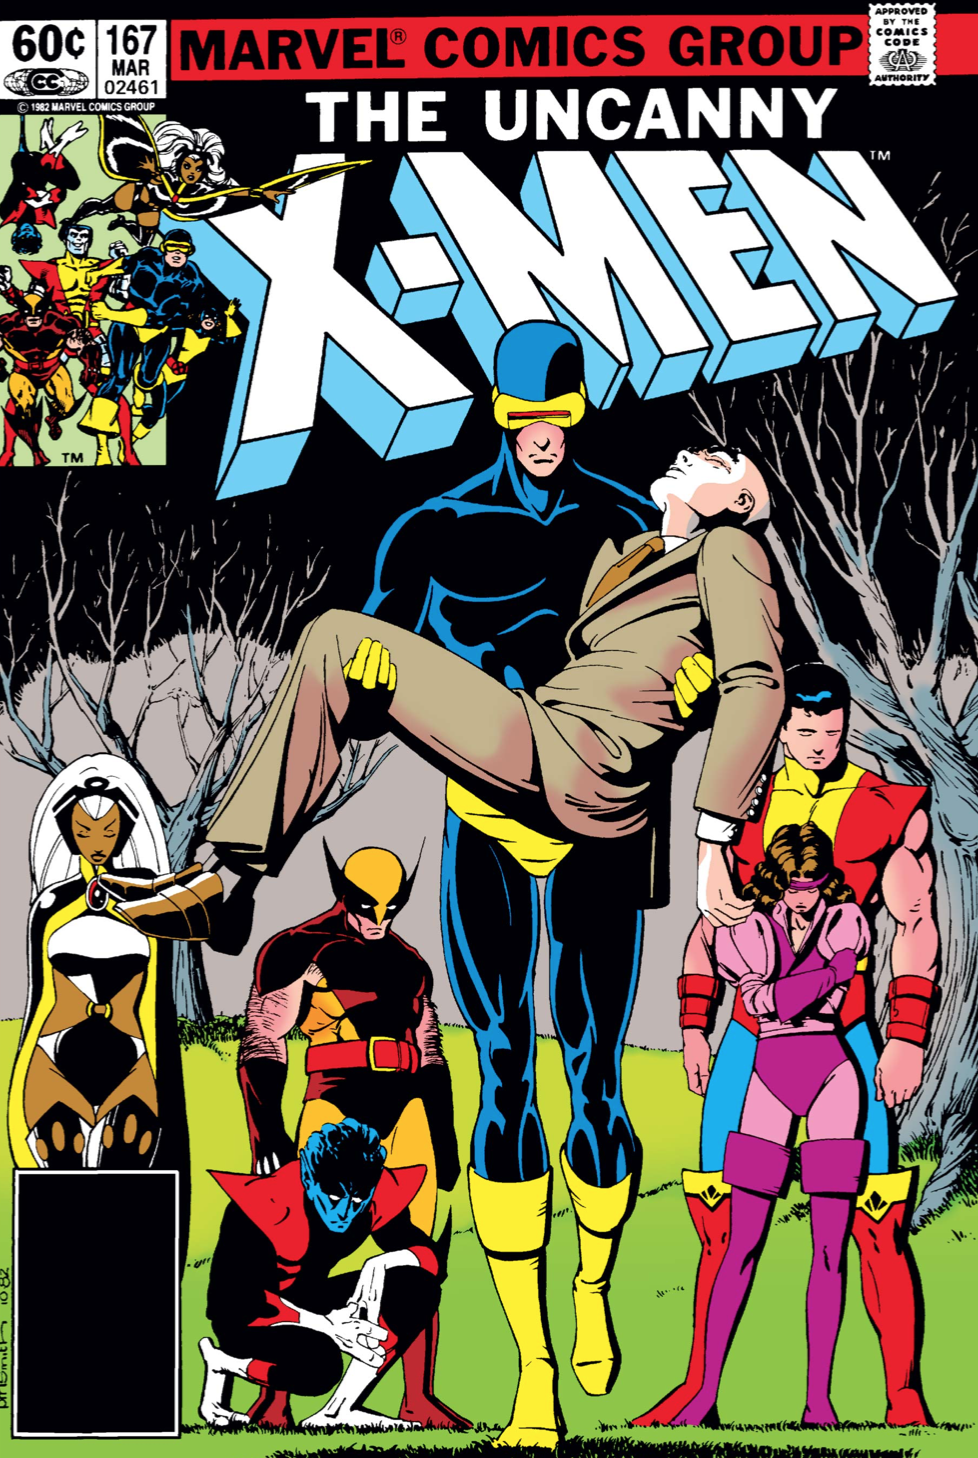 Cover of The Uncanny X-Men #167 with scene of Cyclops holding Professor X pieta-style outside as team looks on